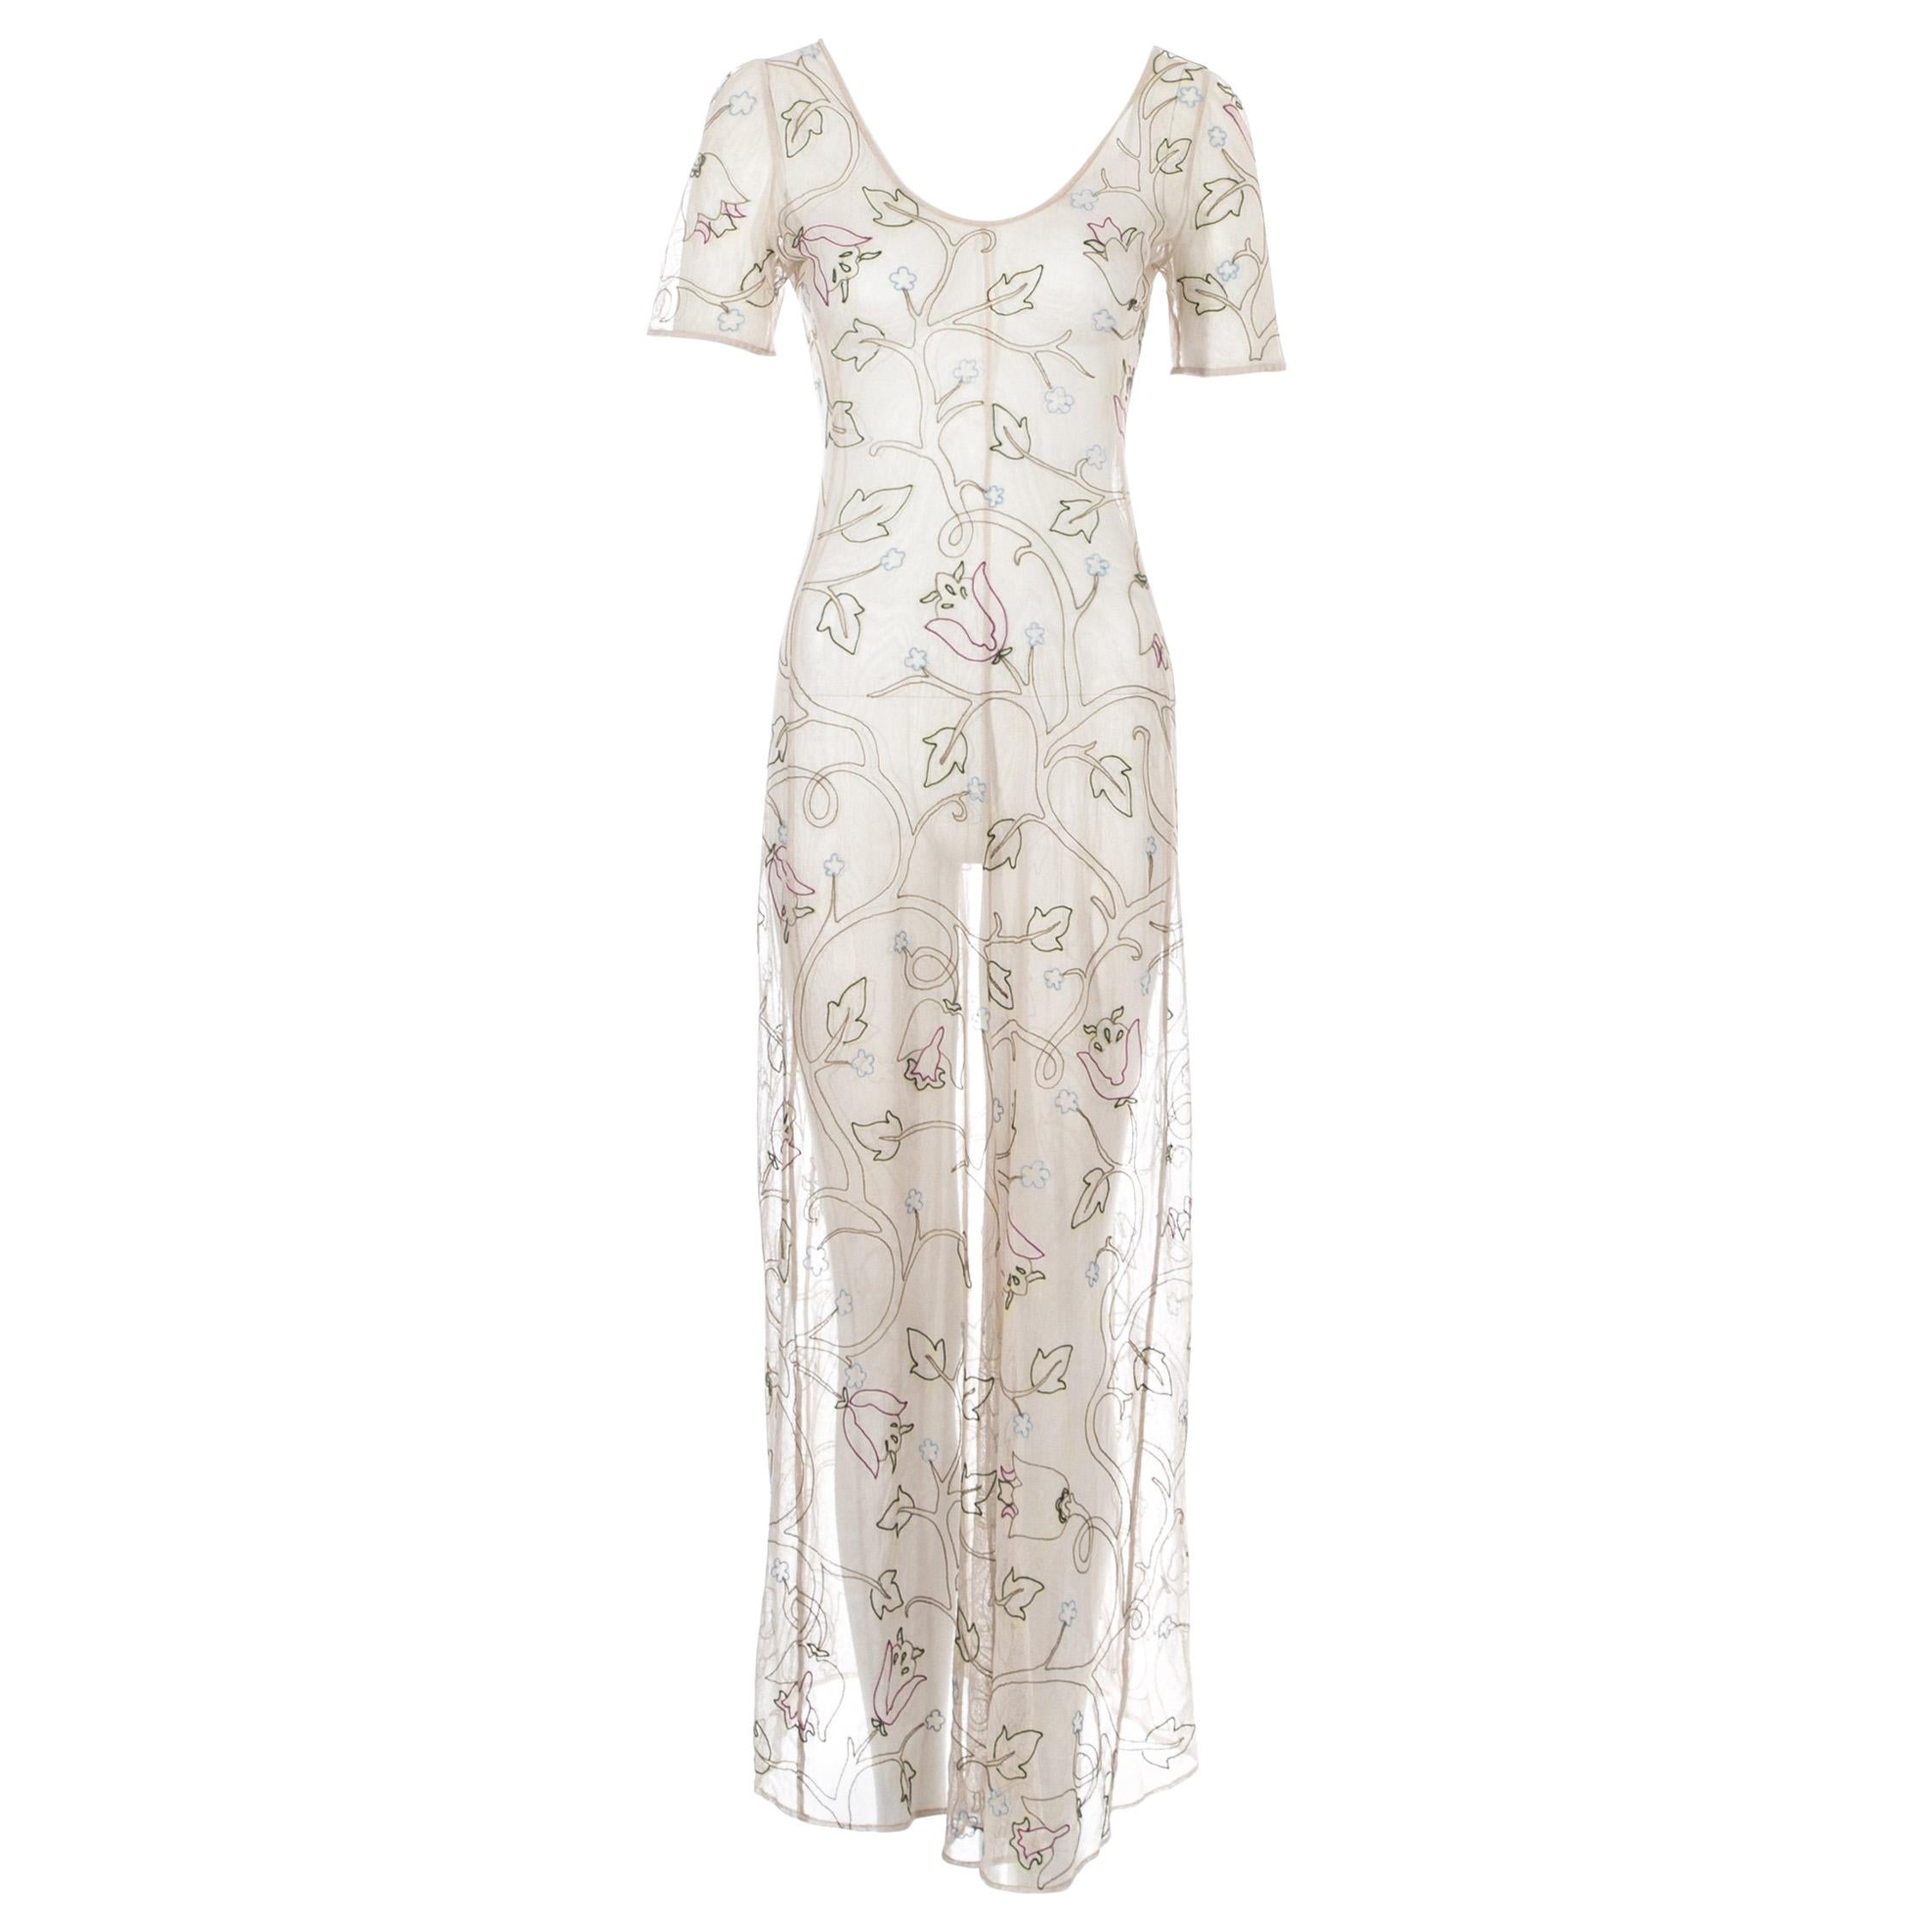 Prada nude mesh evening dress with floral embroidery, ss 1997 For Sale